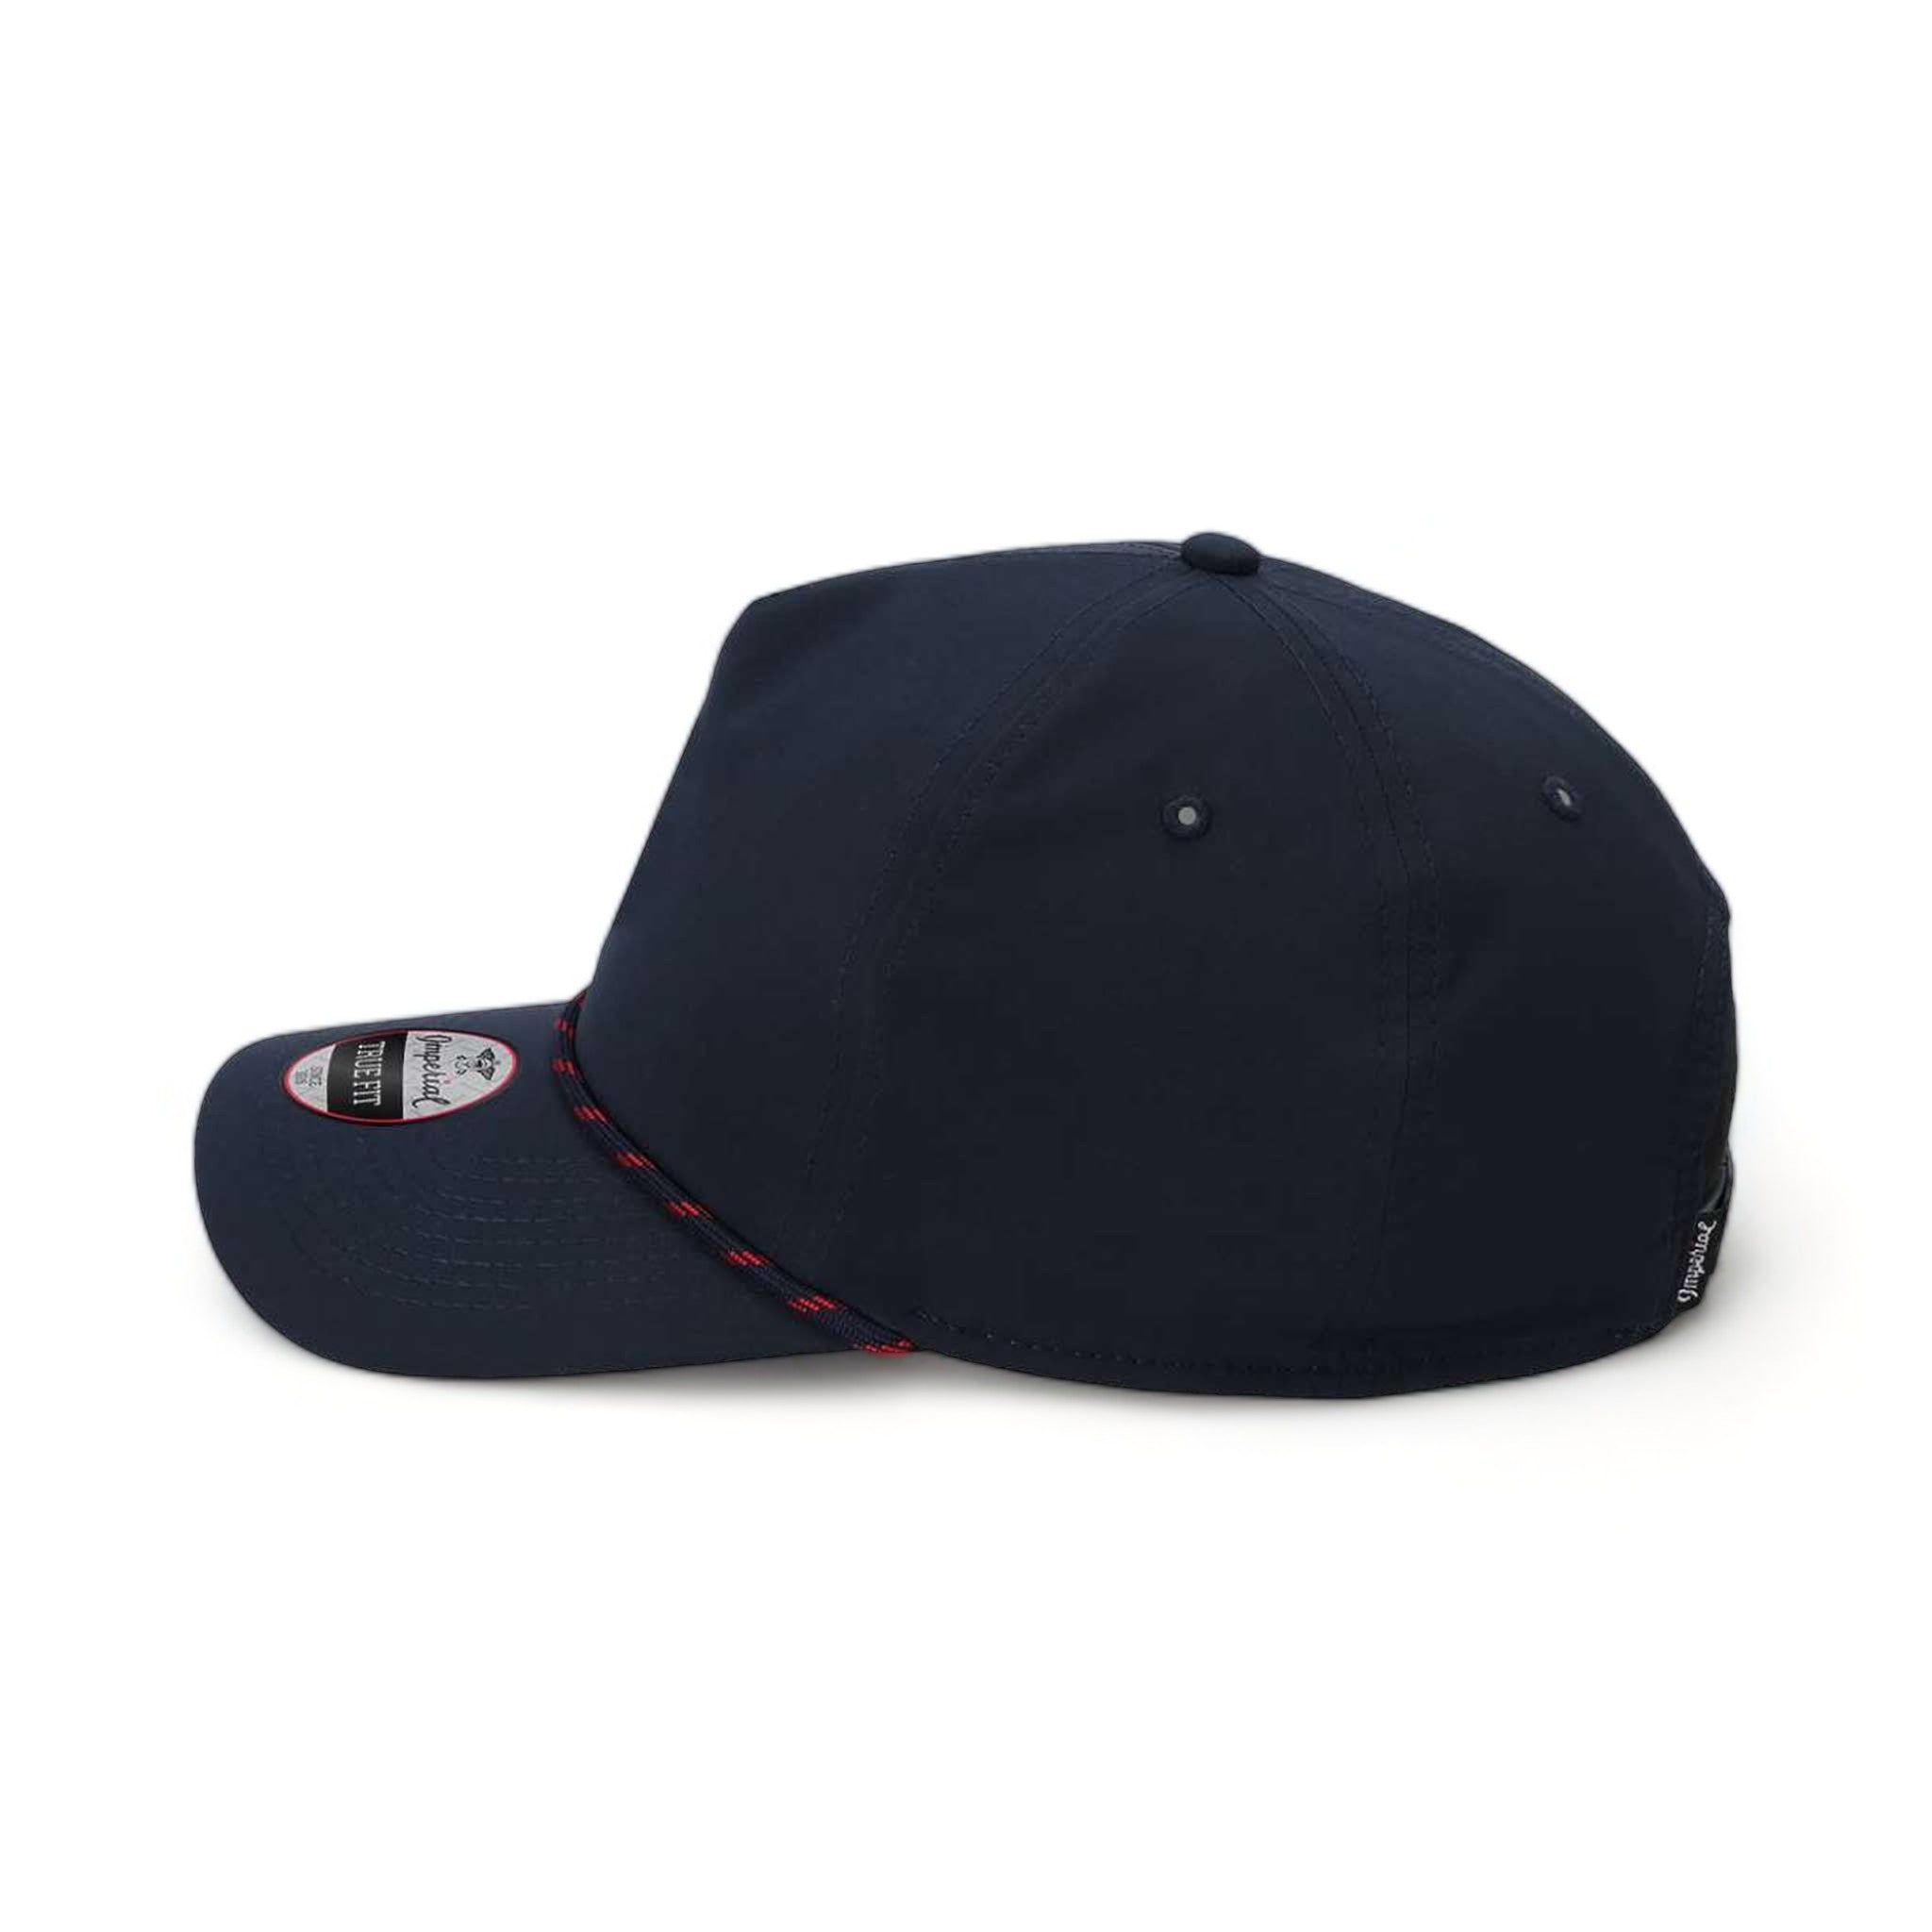 Side view of Imperial 5054 custom hat in navy and navy-red